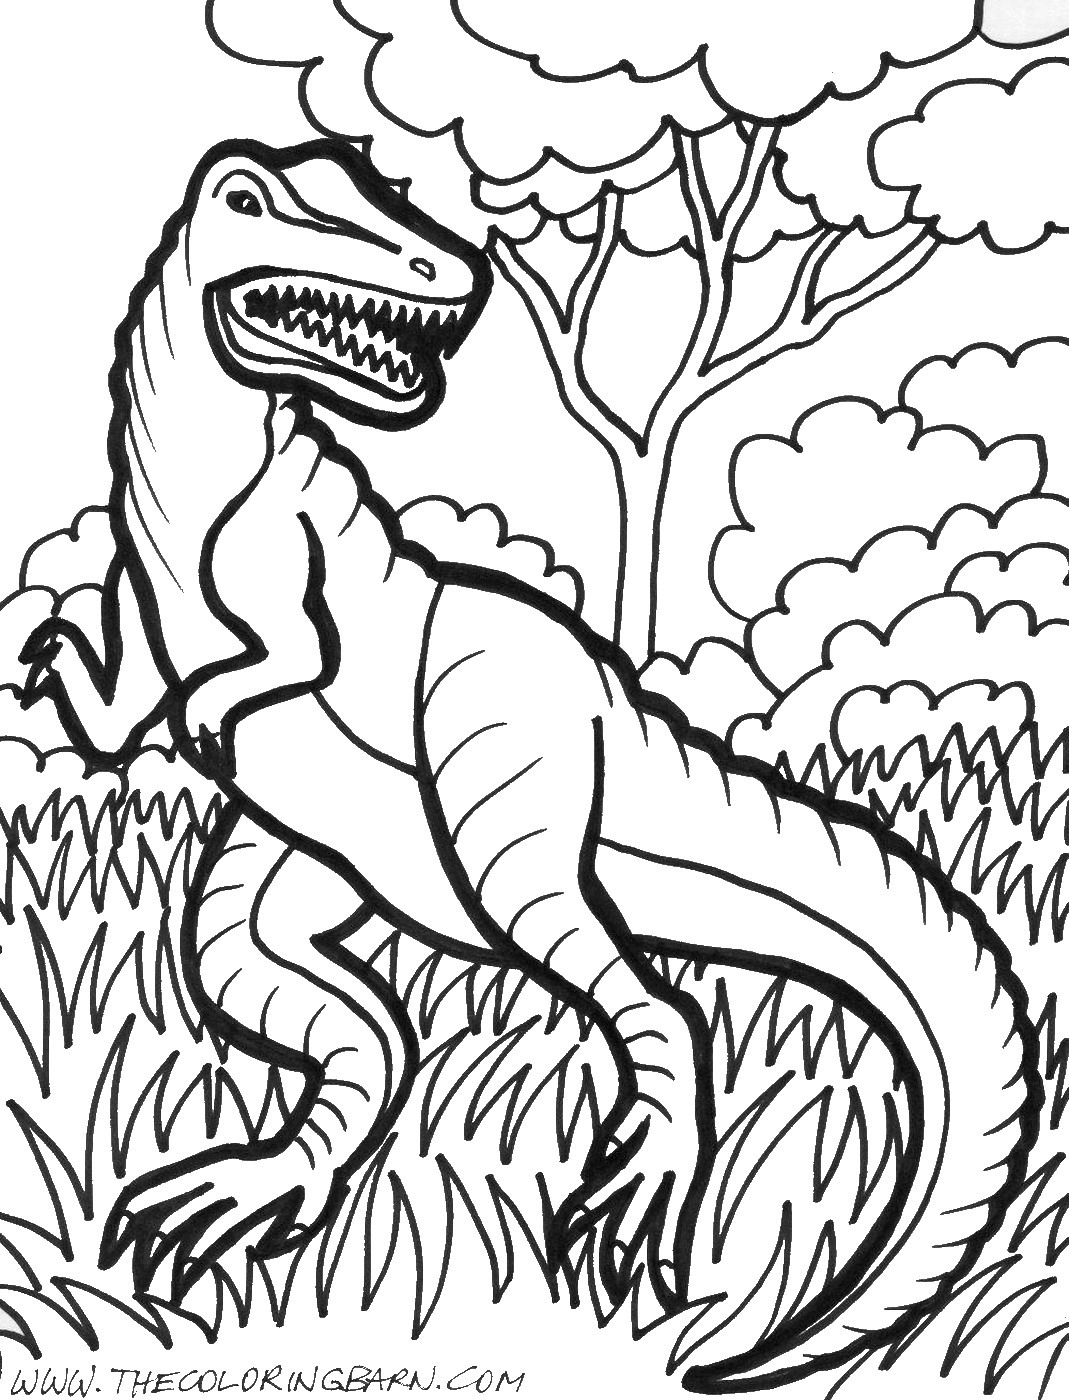 dinosaur-coloring-pages-birthday-printable